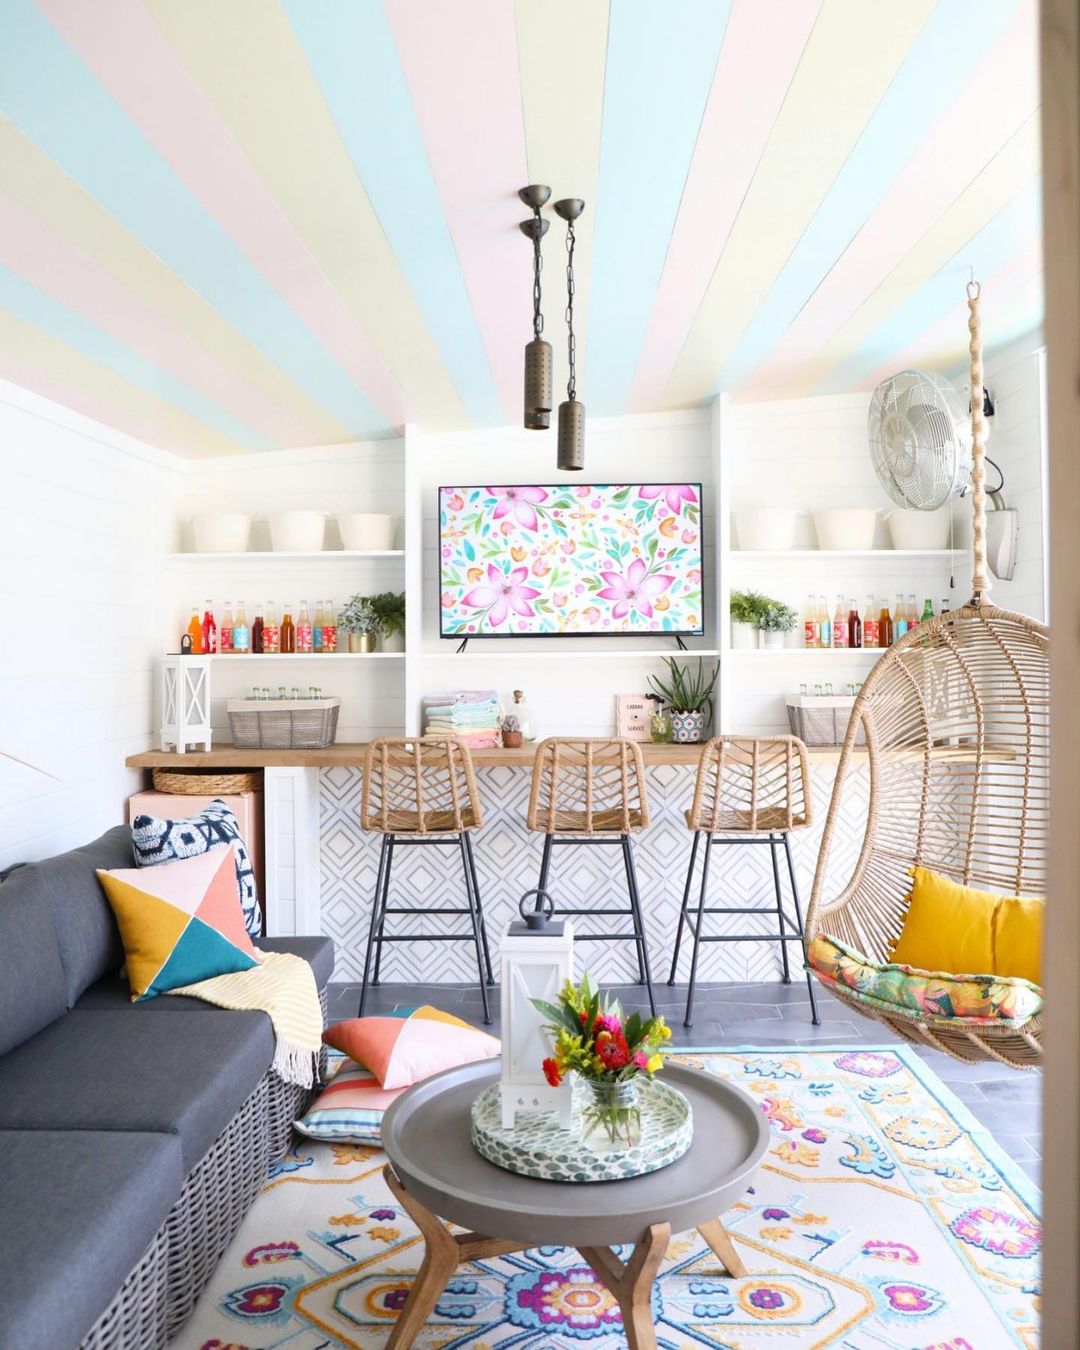 Living Space Bar Area with Bright Ceiling Paint. Photo by Instagram user @thehandmadehome